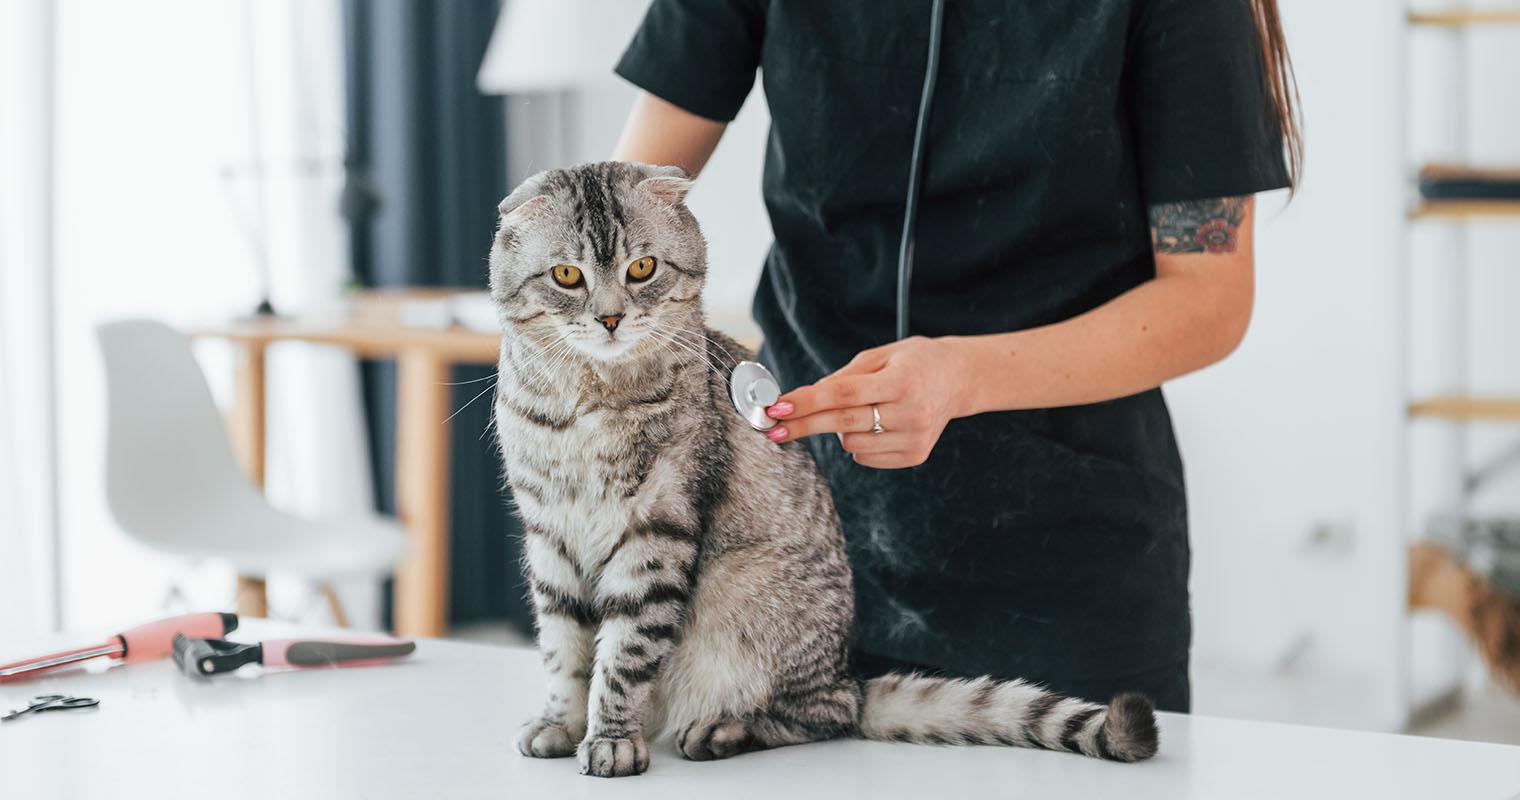 Cat Vaccines: What Vaccines Do Cats Need?